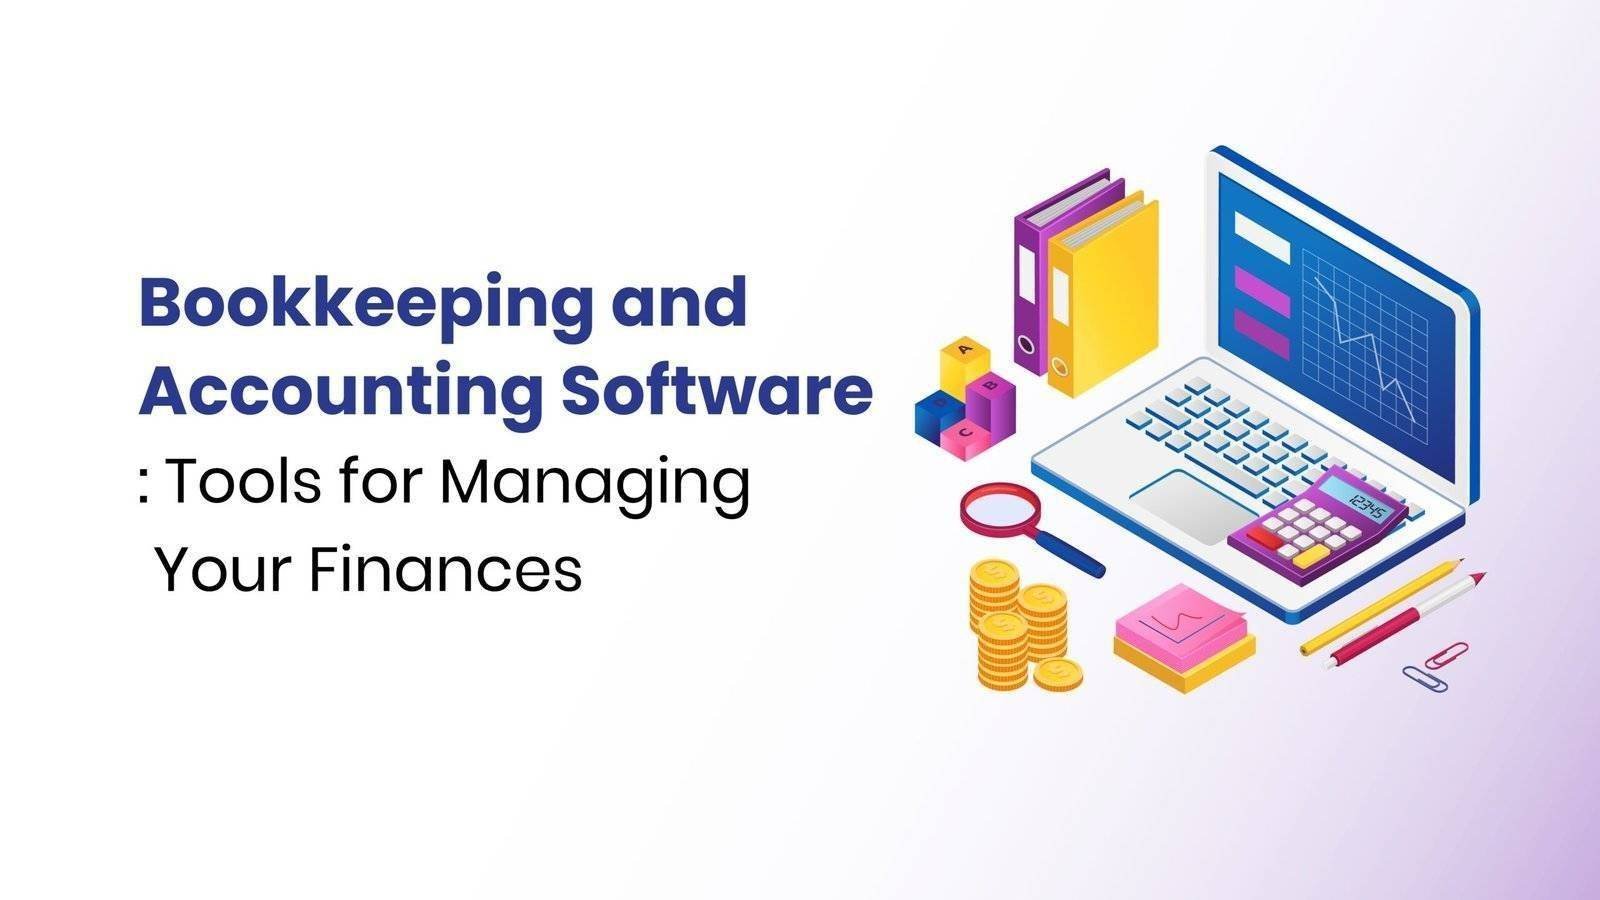 Bookkeeping and Accounting Software: Tools for Managing Your Finances